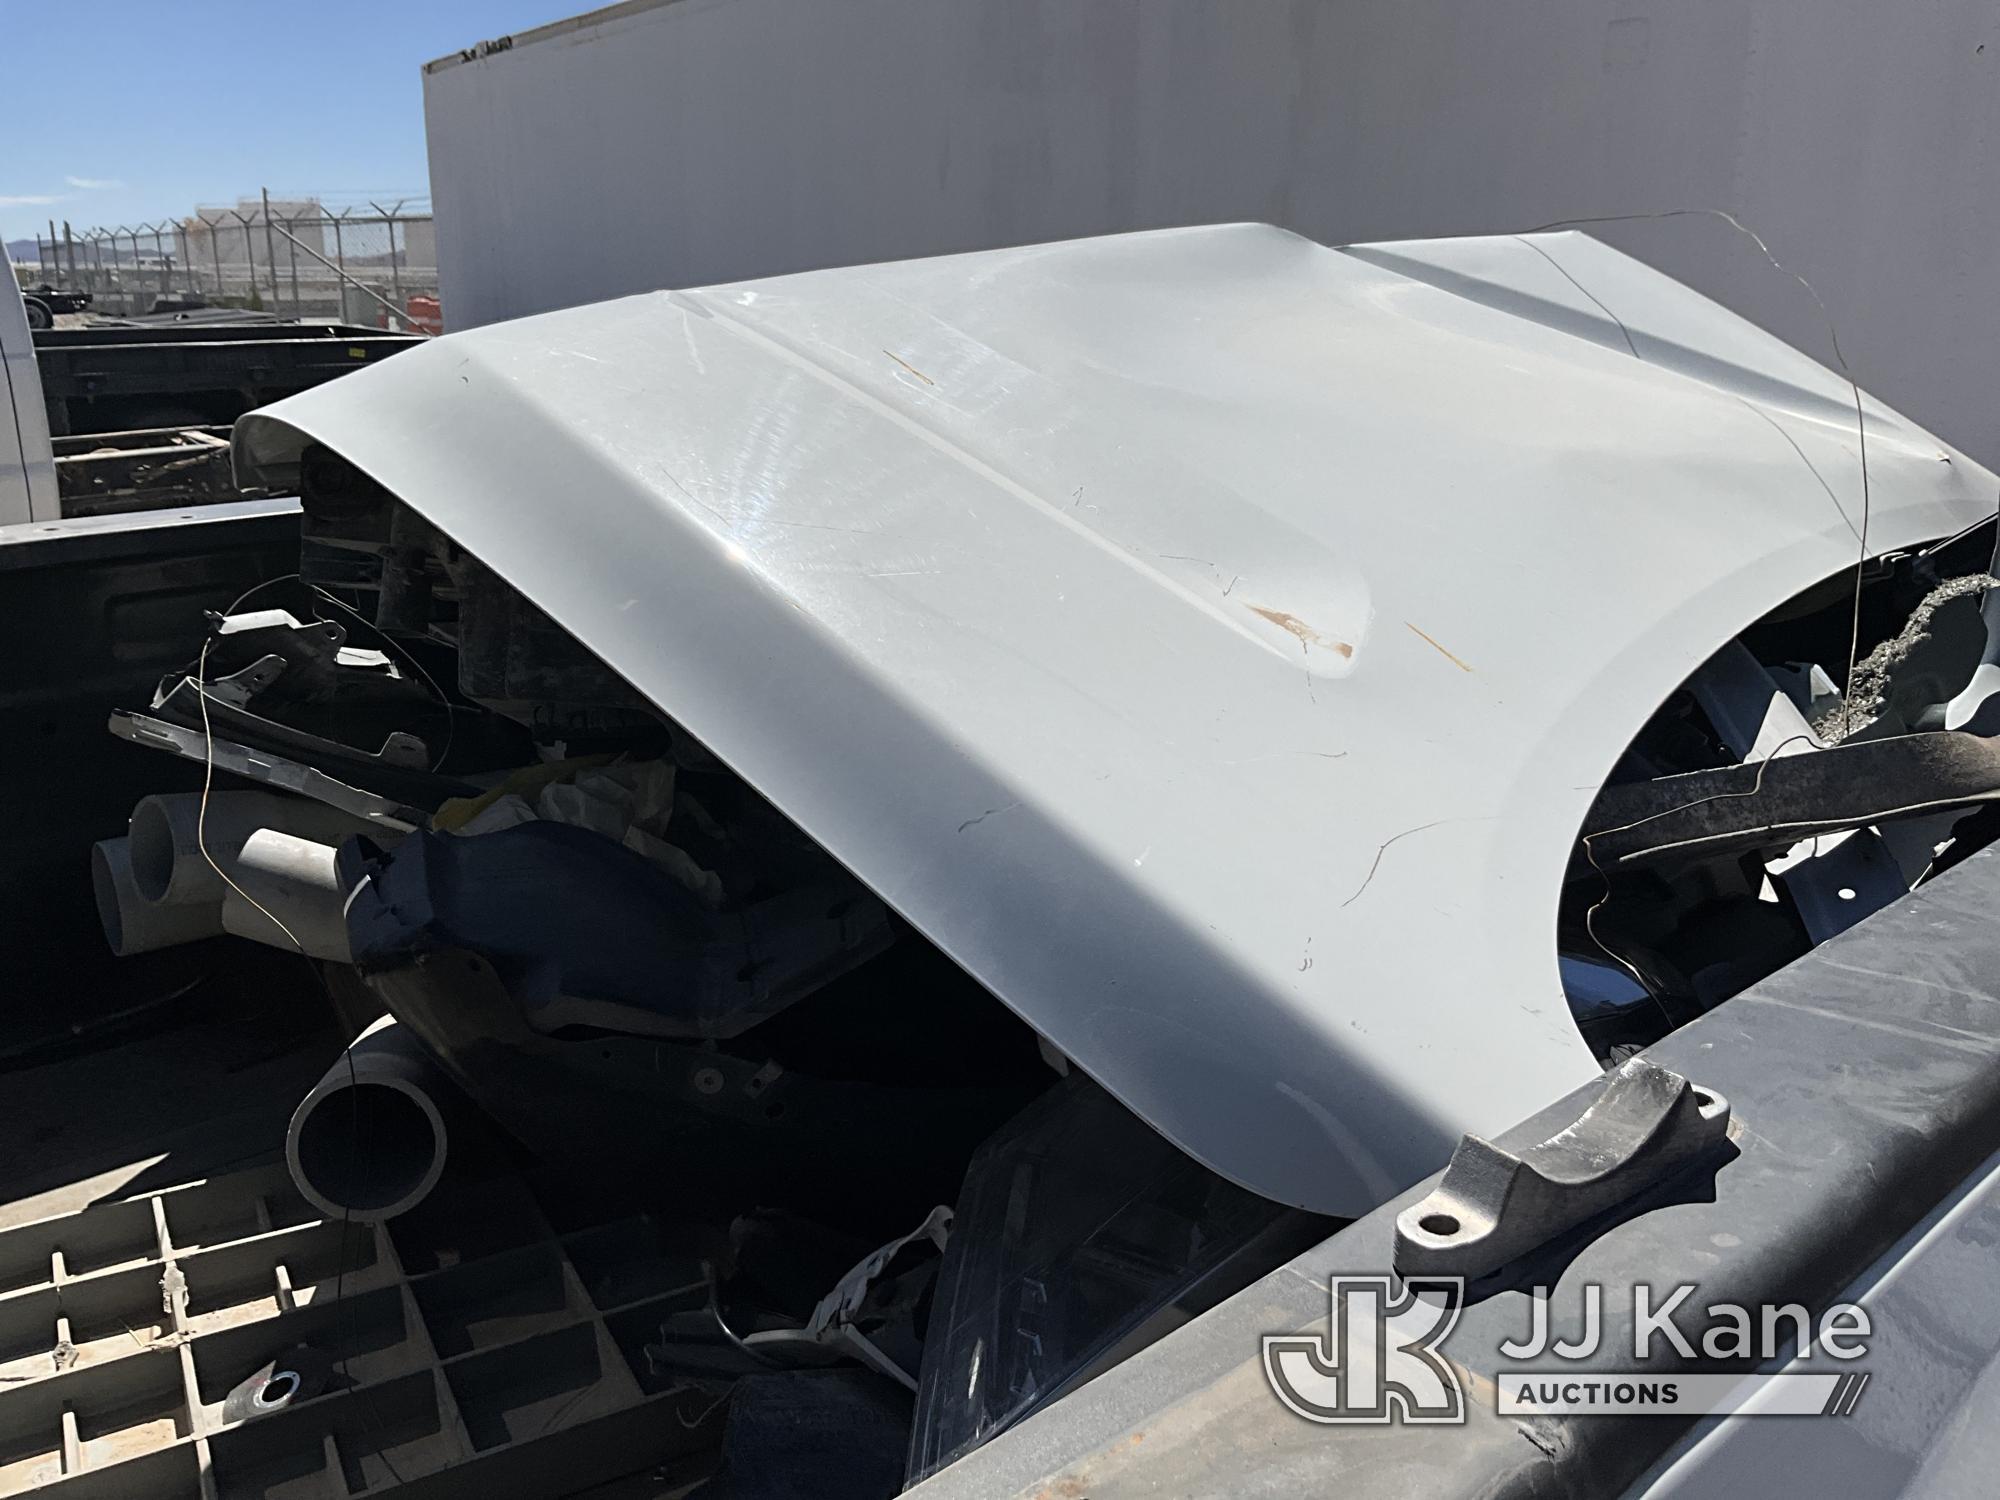 (El Paso, TX) 2019 Nissan Titan XD 4x4 Crew-Cab Pickup Truck Wrecked, Not Running Or Moving, Parts I